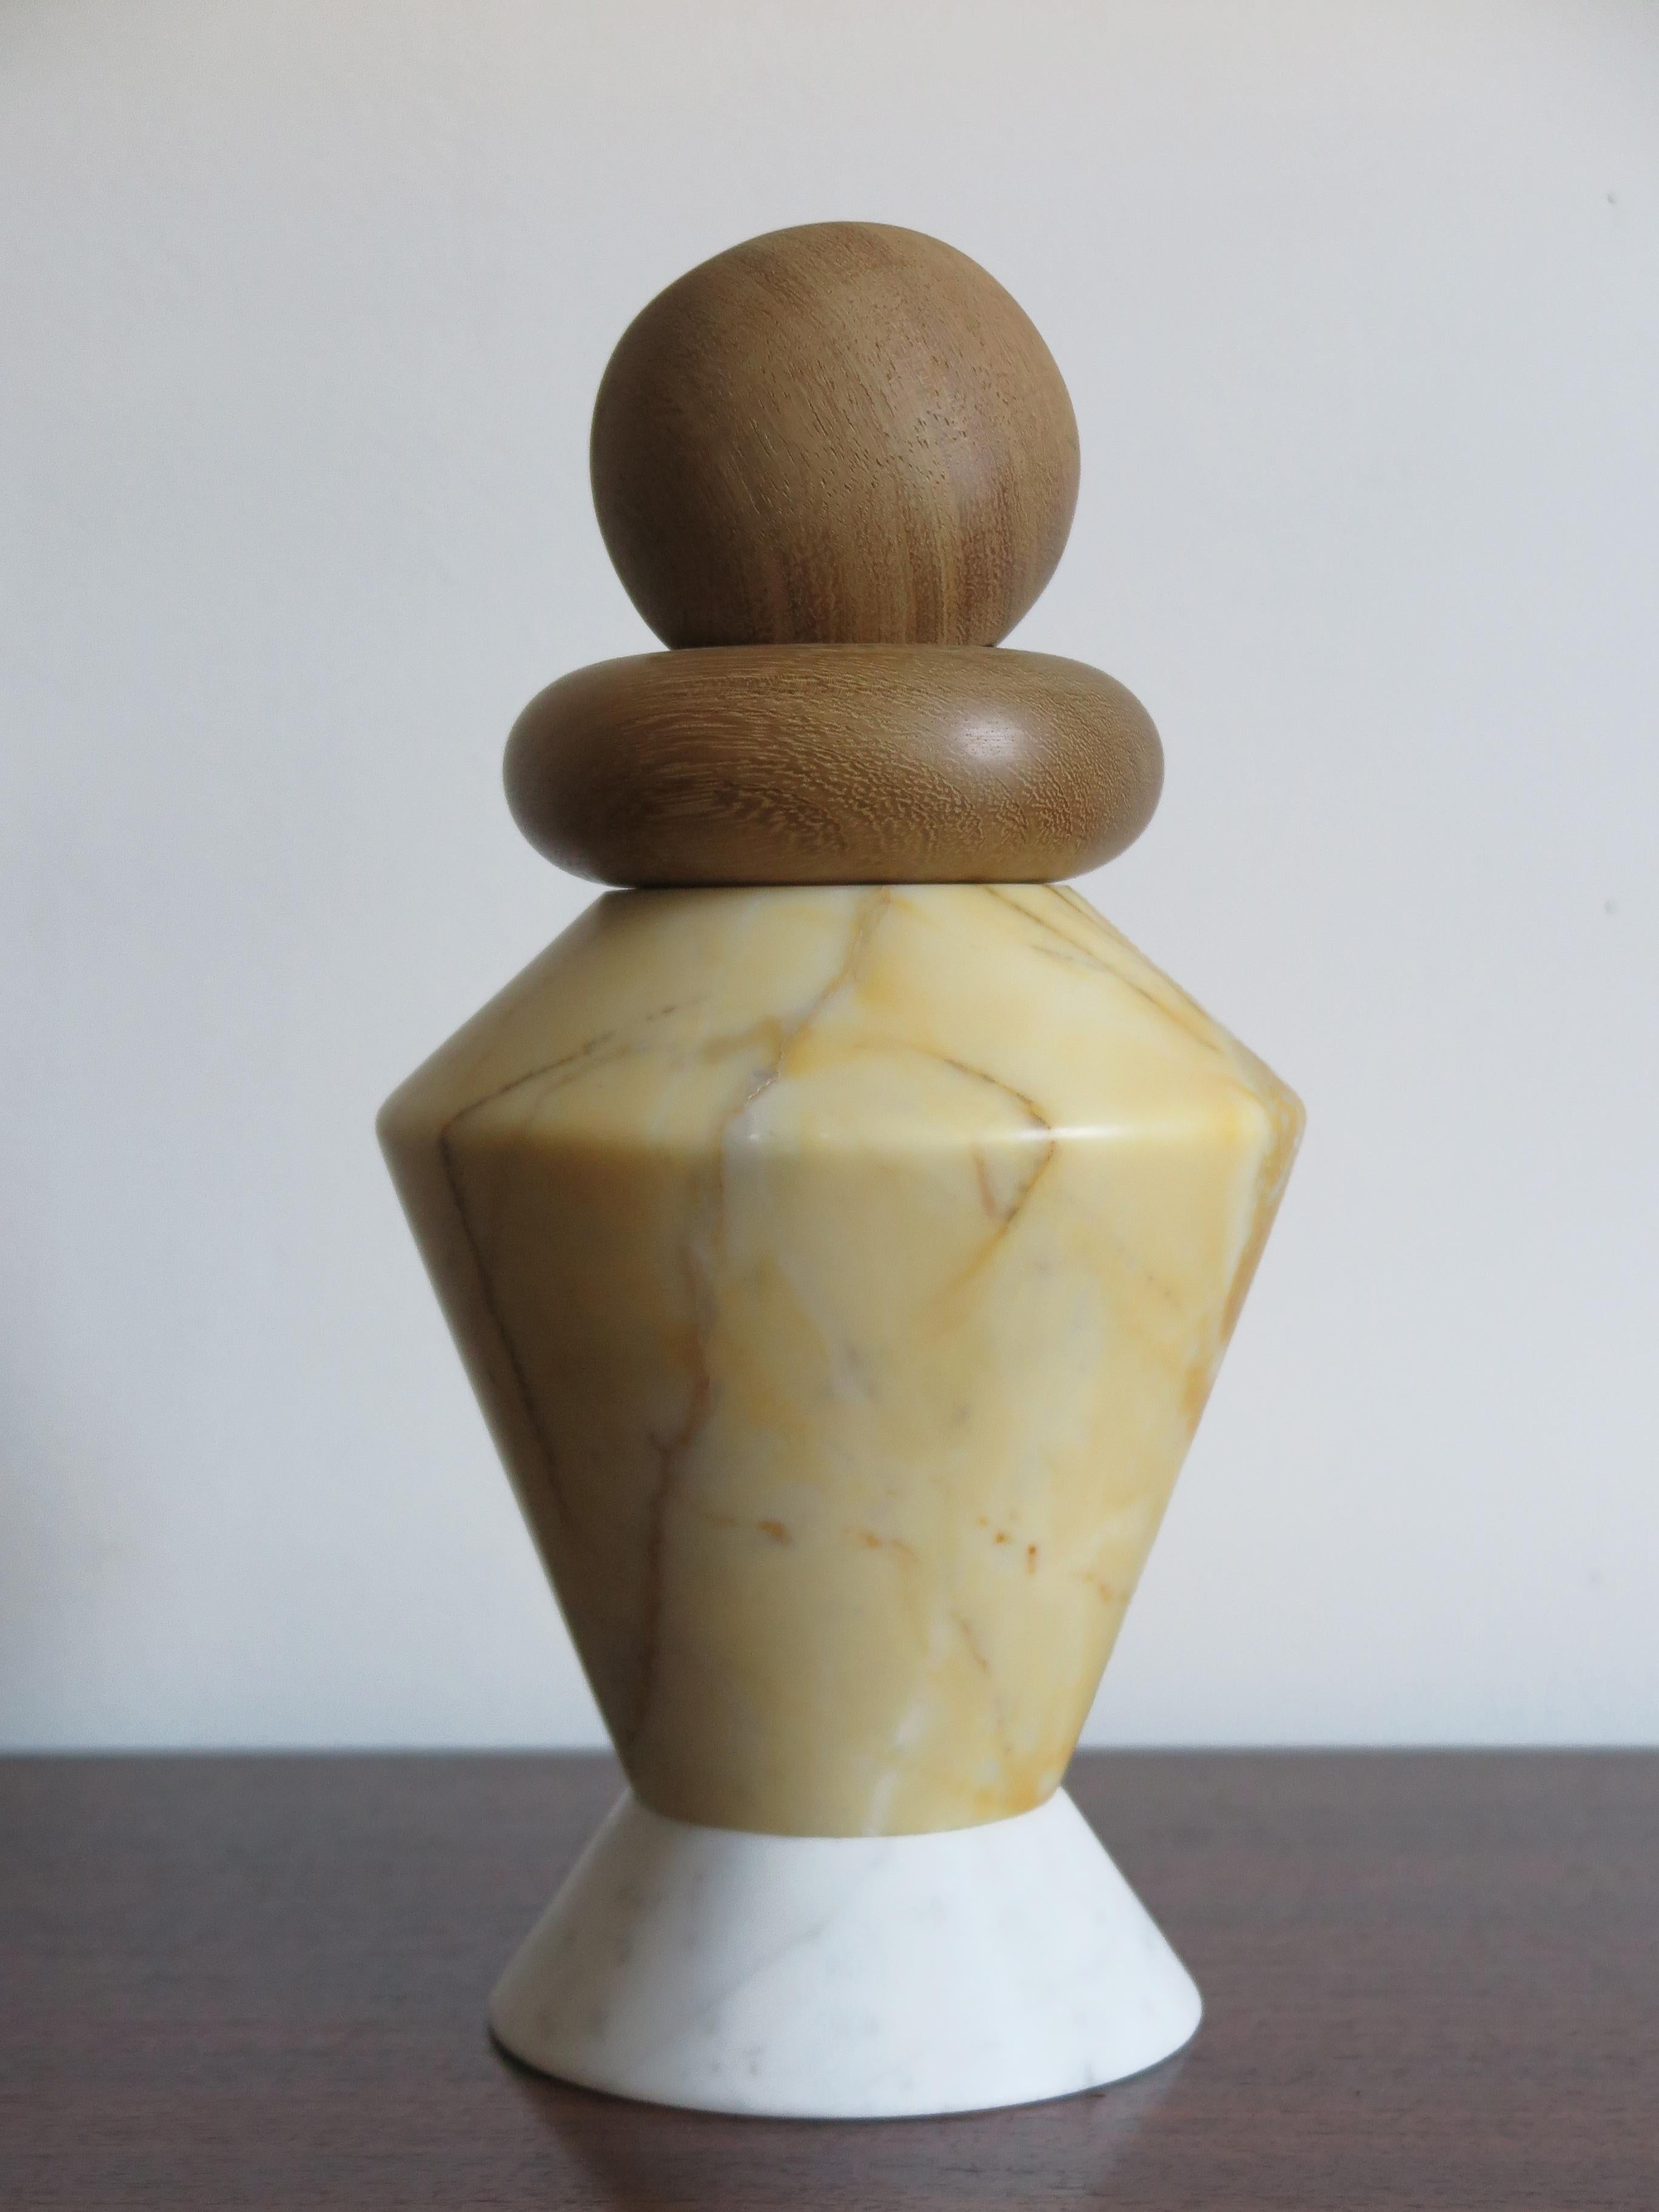 Italian Marble and Wood Contemporary Sculpture, Candleholders, Flower Vase 